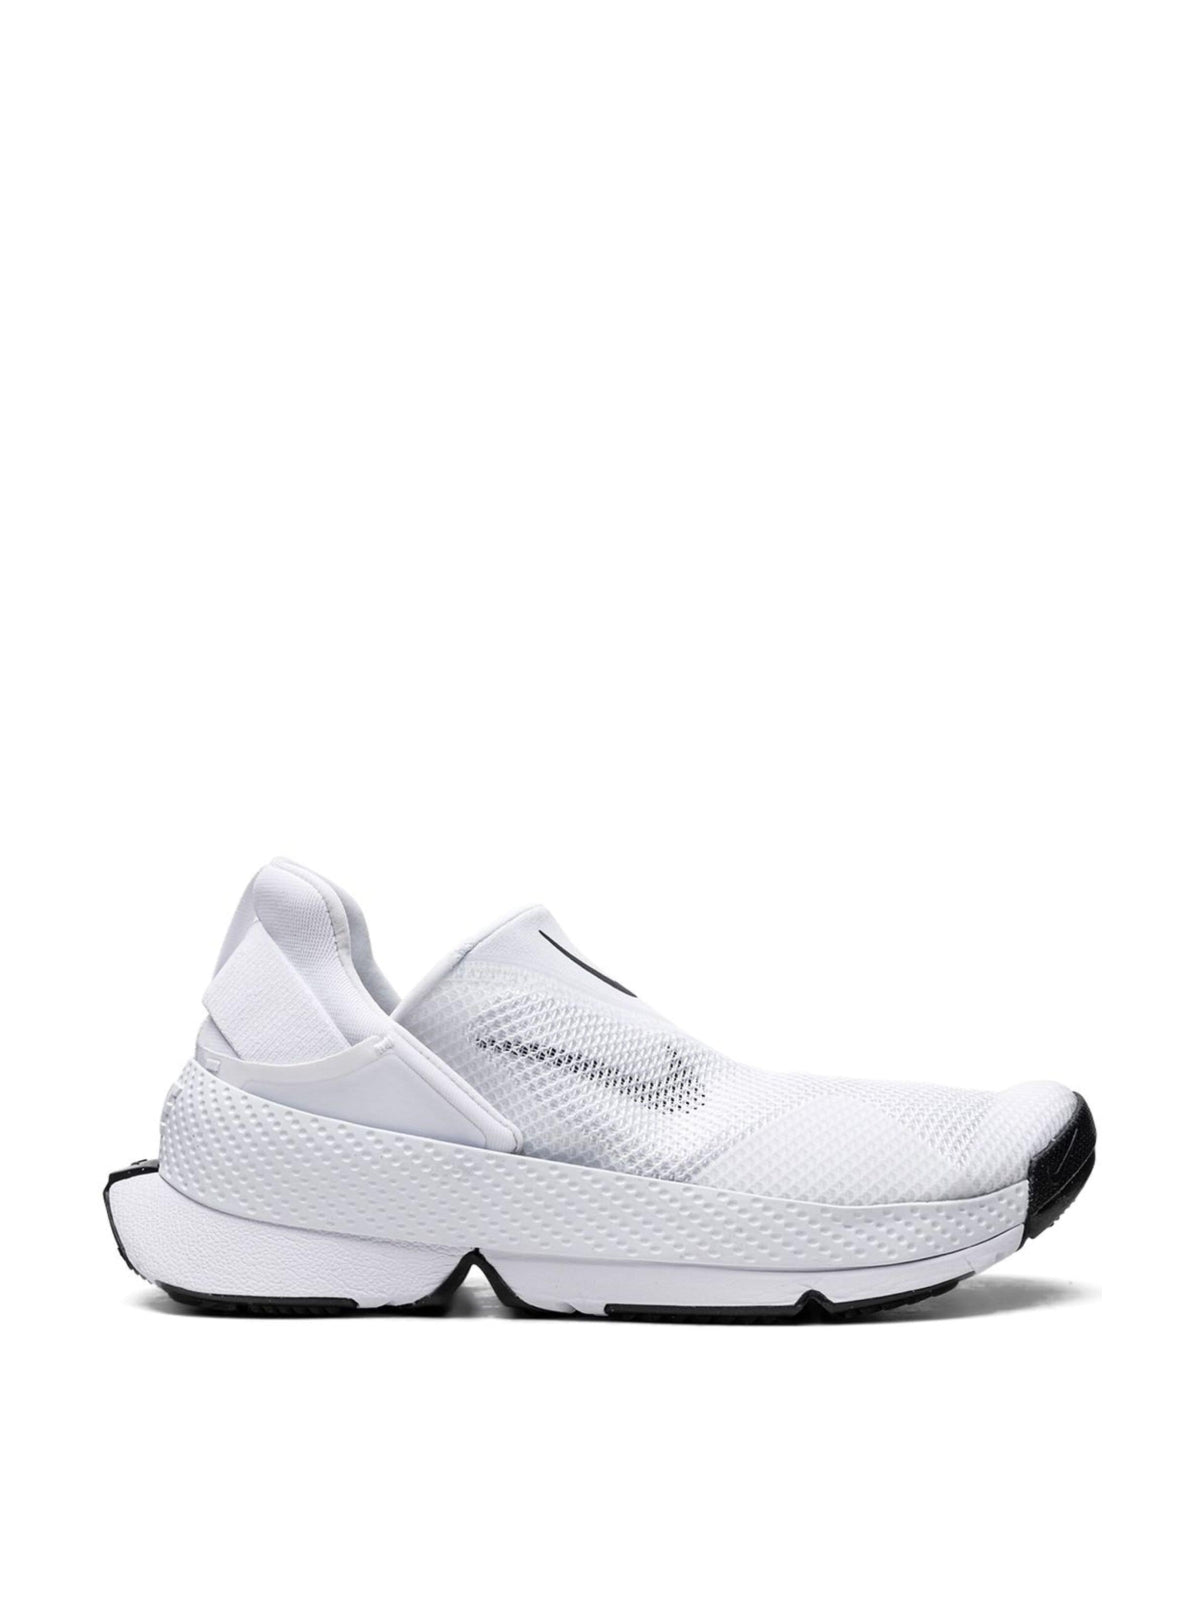 Nike-OUTLET-SALE-Go FlyEase Sneakers-ARCHIVIST